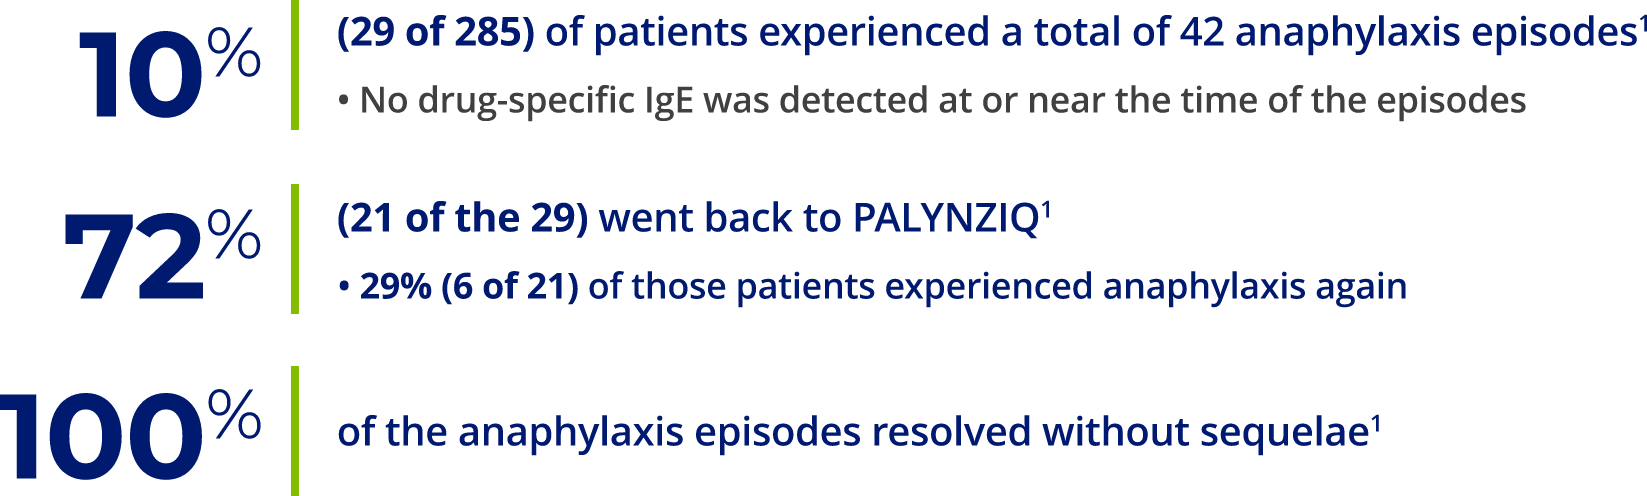 Non–IgE-mediated anaphylaxis was observed in PALYNZIQ clinical trials